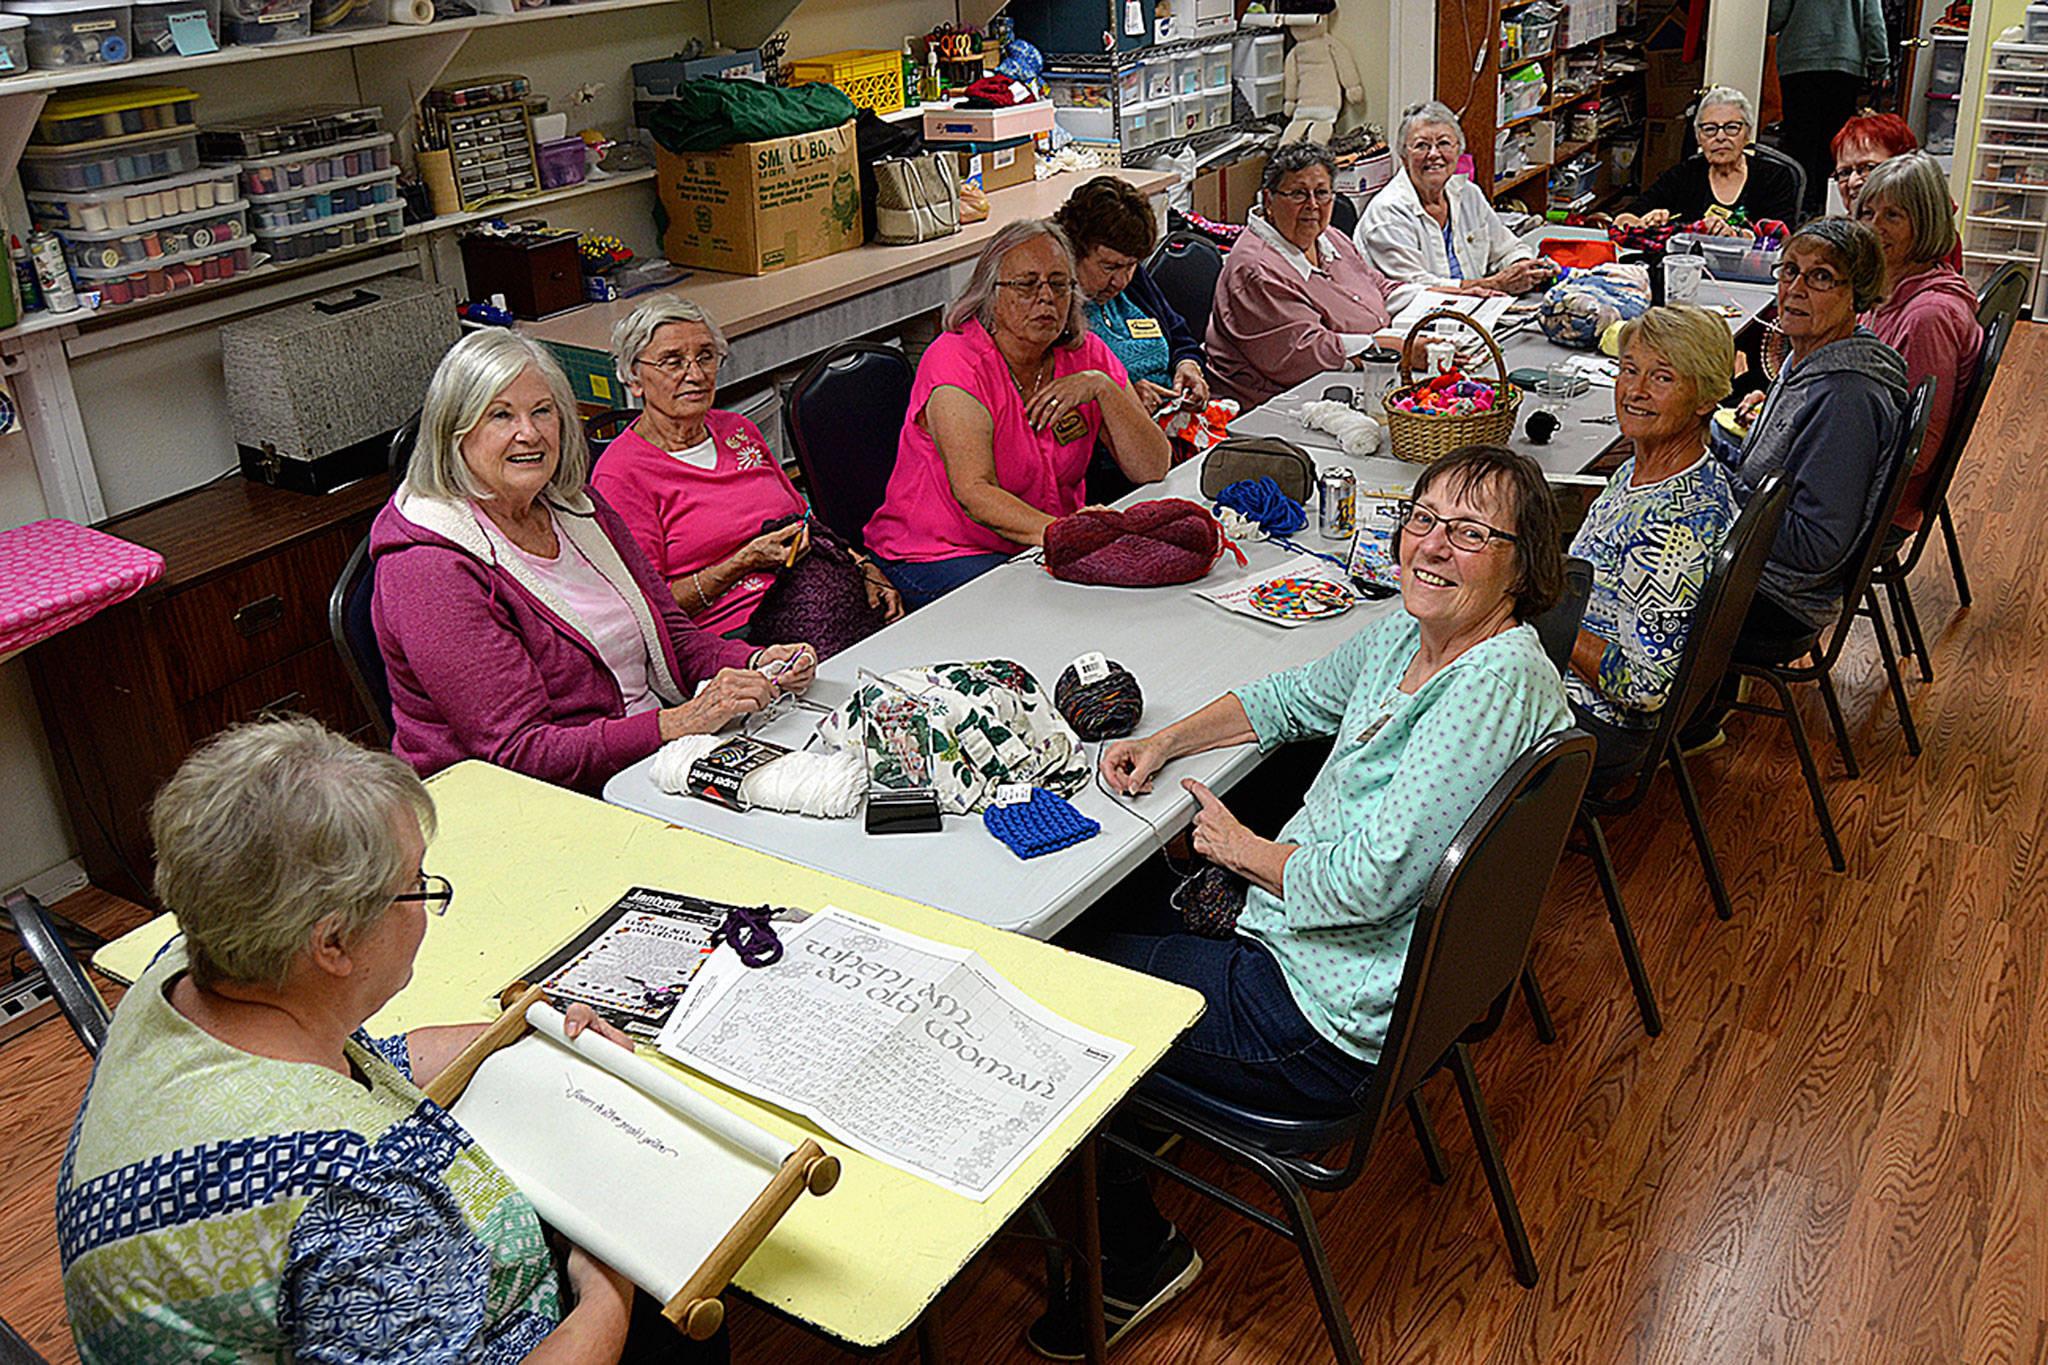 Shipley Center members enjoy some time creating fiber arts in the Arts and Crafts room during the Open House on Sept. 12. Matthew Nash/Olympic Peninsula News Group